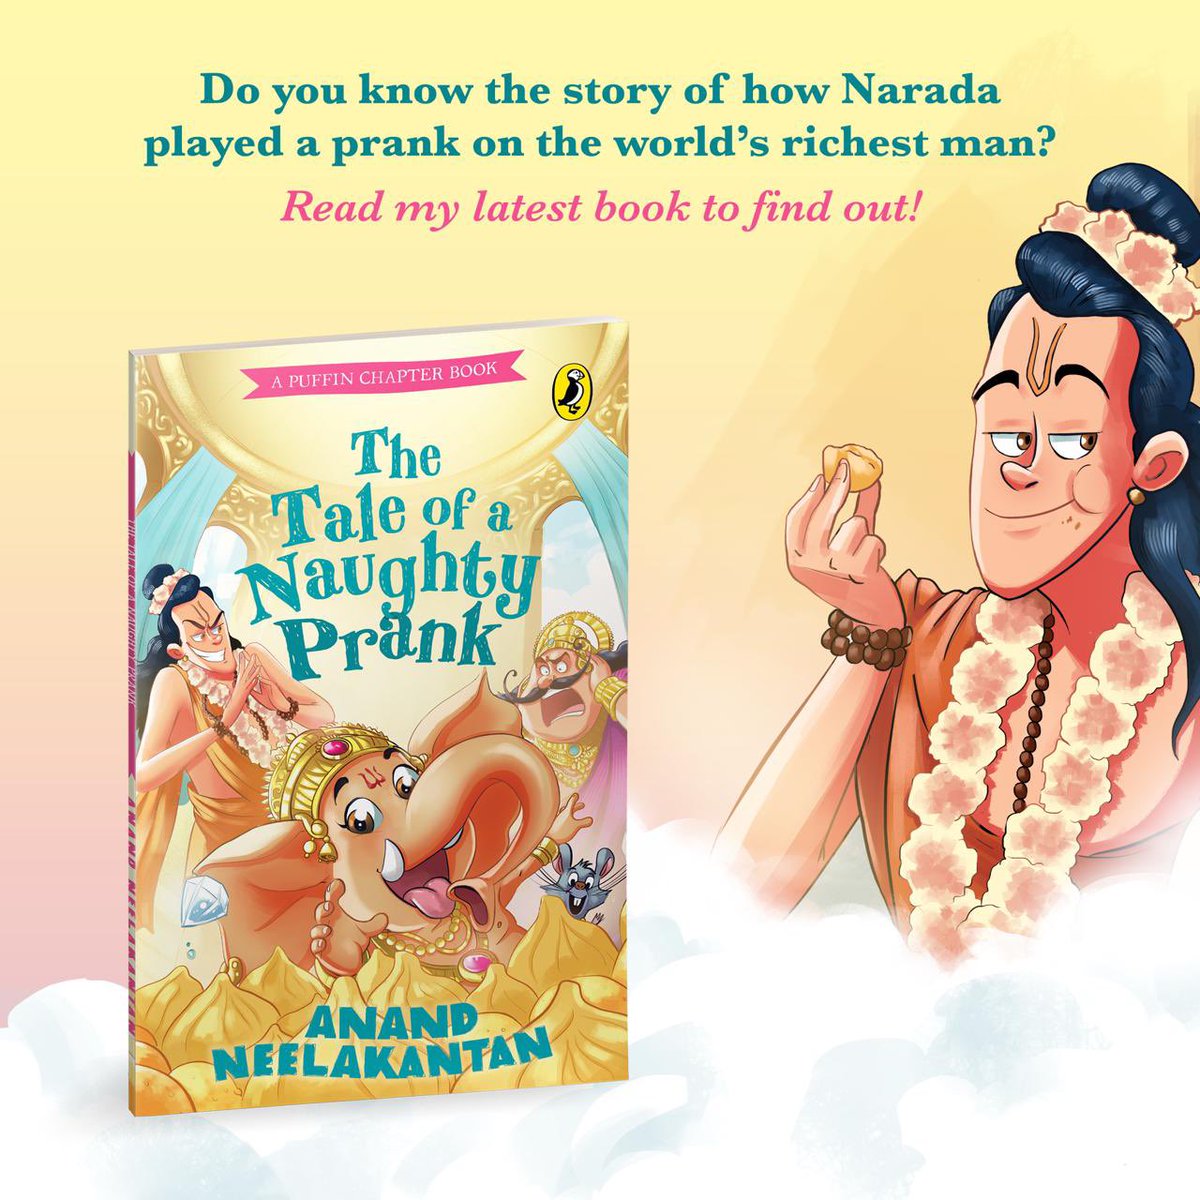 My new book for the little ones. Introduce Indian Puranas to your little ones with some slice or fun and laughter. With amazing illustrations by doodle nerve to go with. @PuffinBooks . The Tale of a Naughty Prank: A Puffin Chapter Book amzn.in/d/f0a12EV